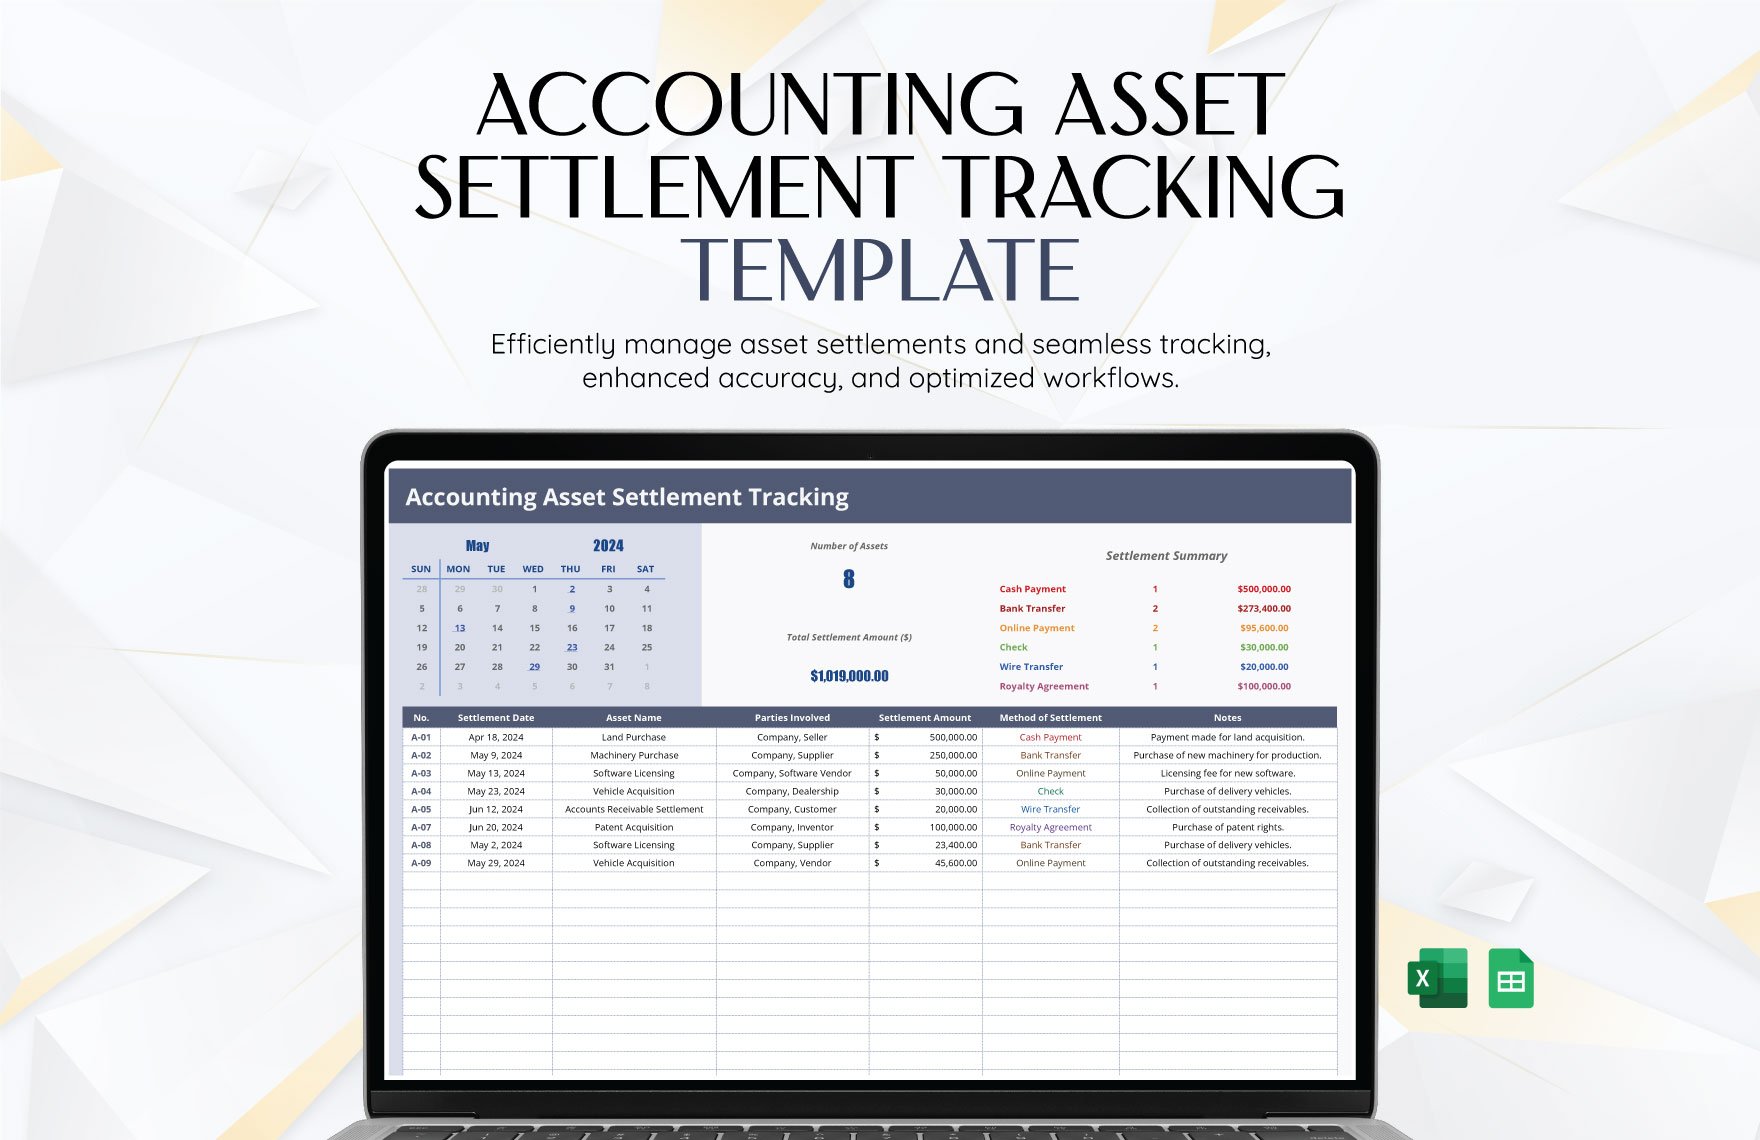 Accounting Asset Settlement Tracking Template in Excel, Google Sheets